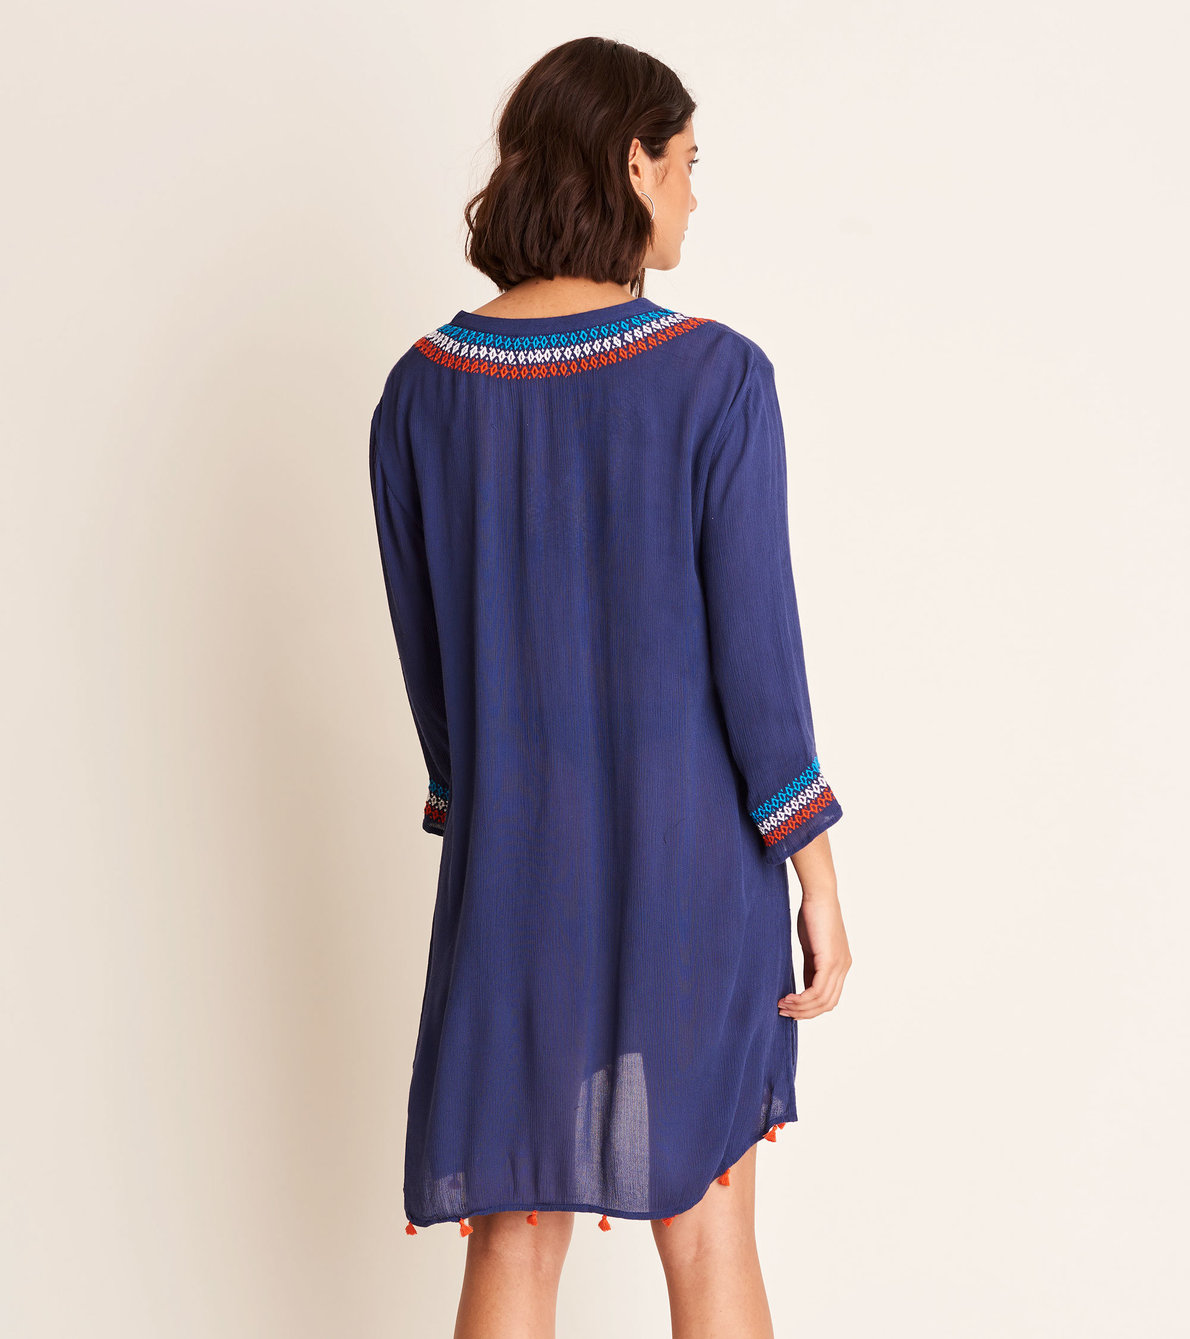 View larger image of Bev Tunic - Patriot Blue